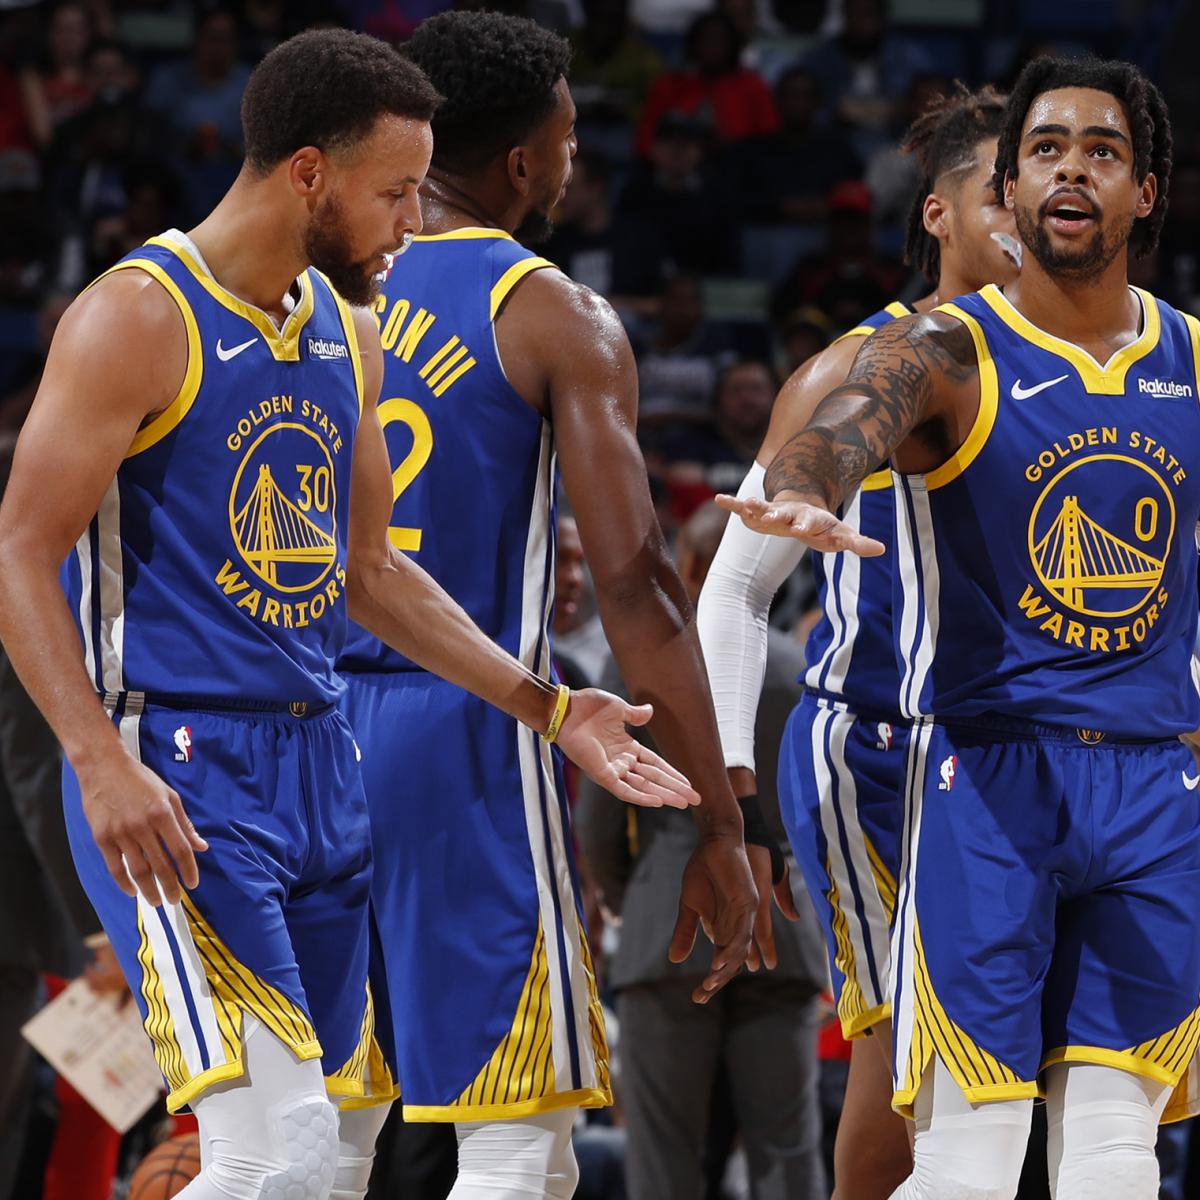 The Warriors' big D'Angelo Russell conundrum 